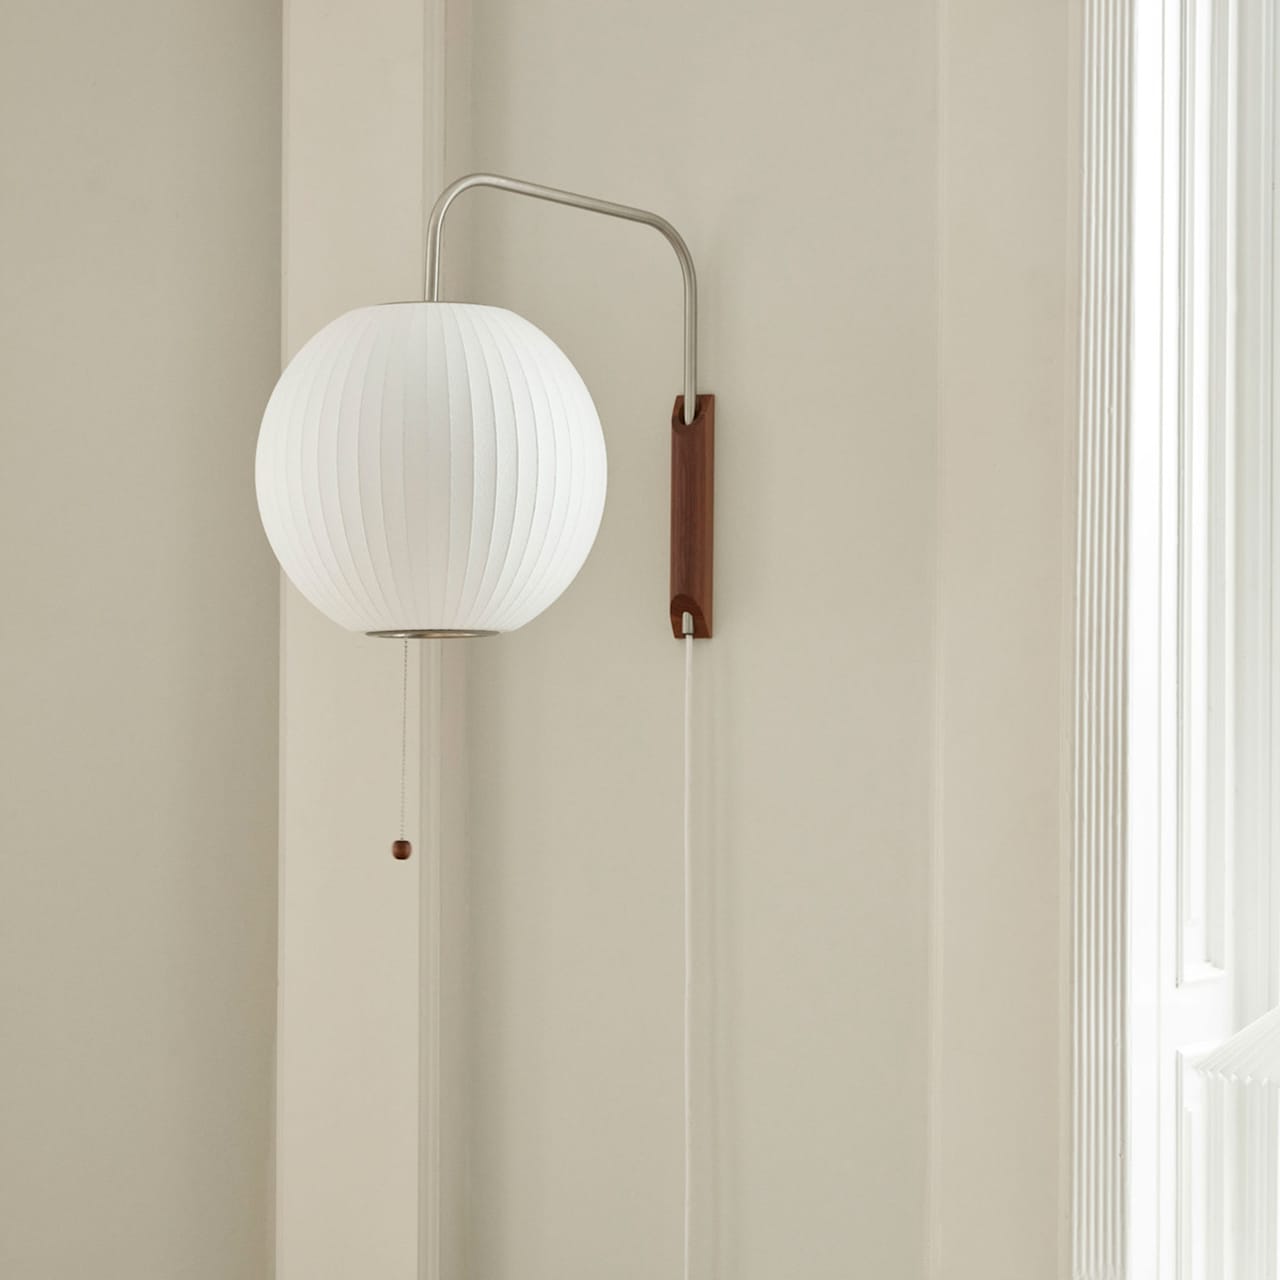 Nelson Ball Wall Sconce